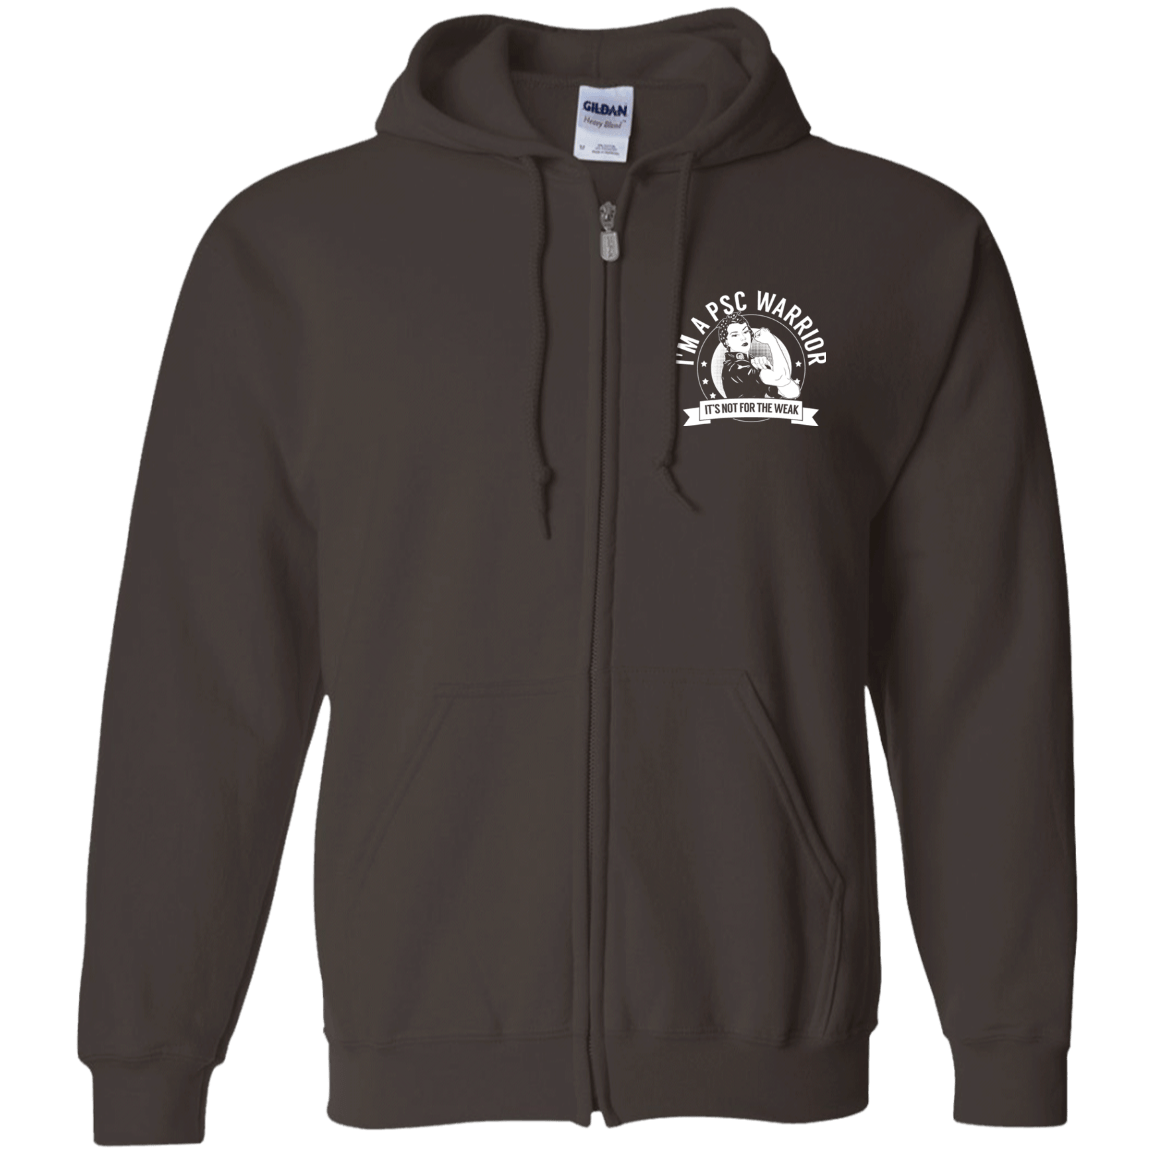 Primary Sclerosing Cholangitis - PSC Warrior NFTW Zip Up Hooded Sweatshirt - The Unchargeables